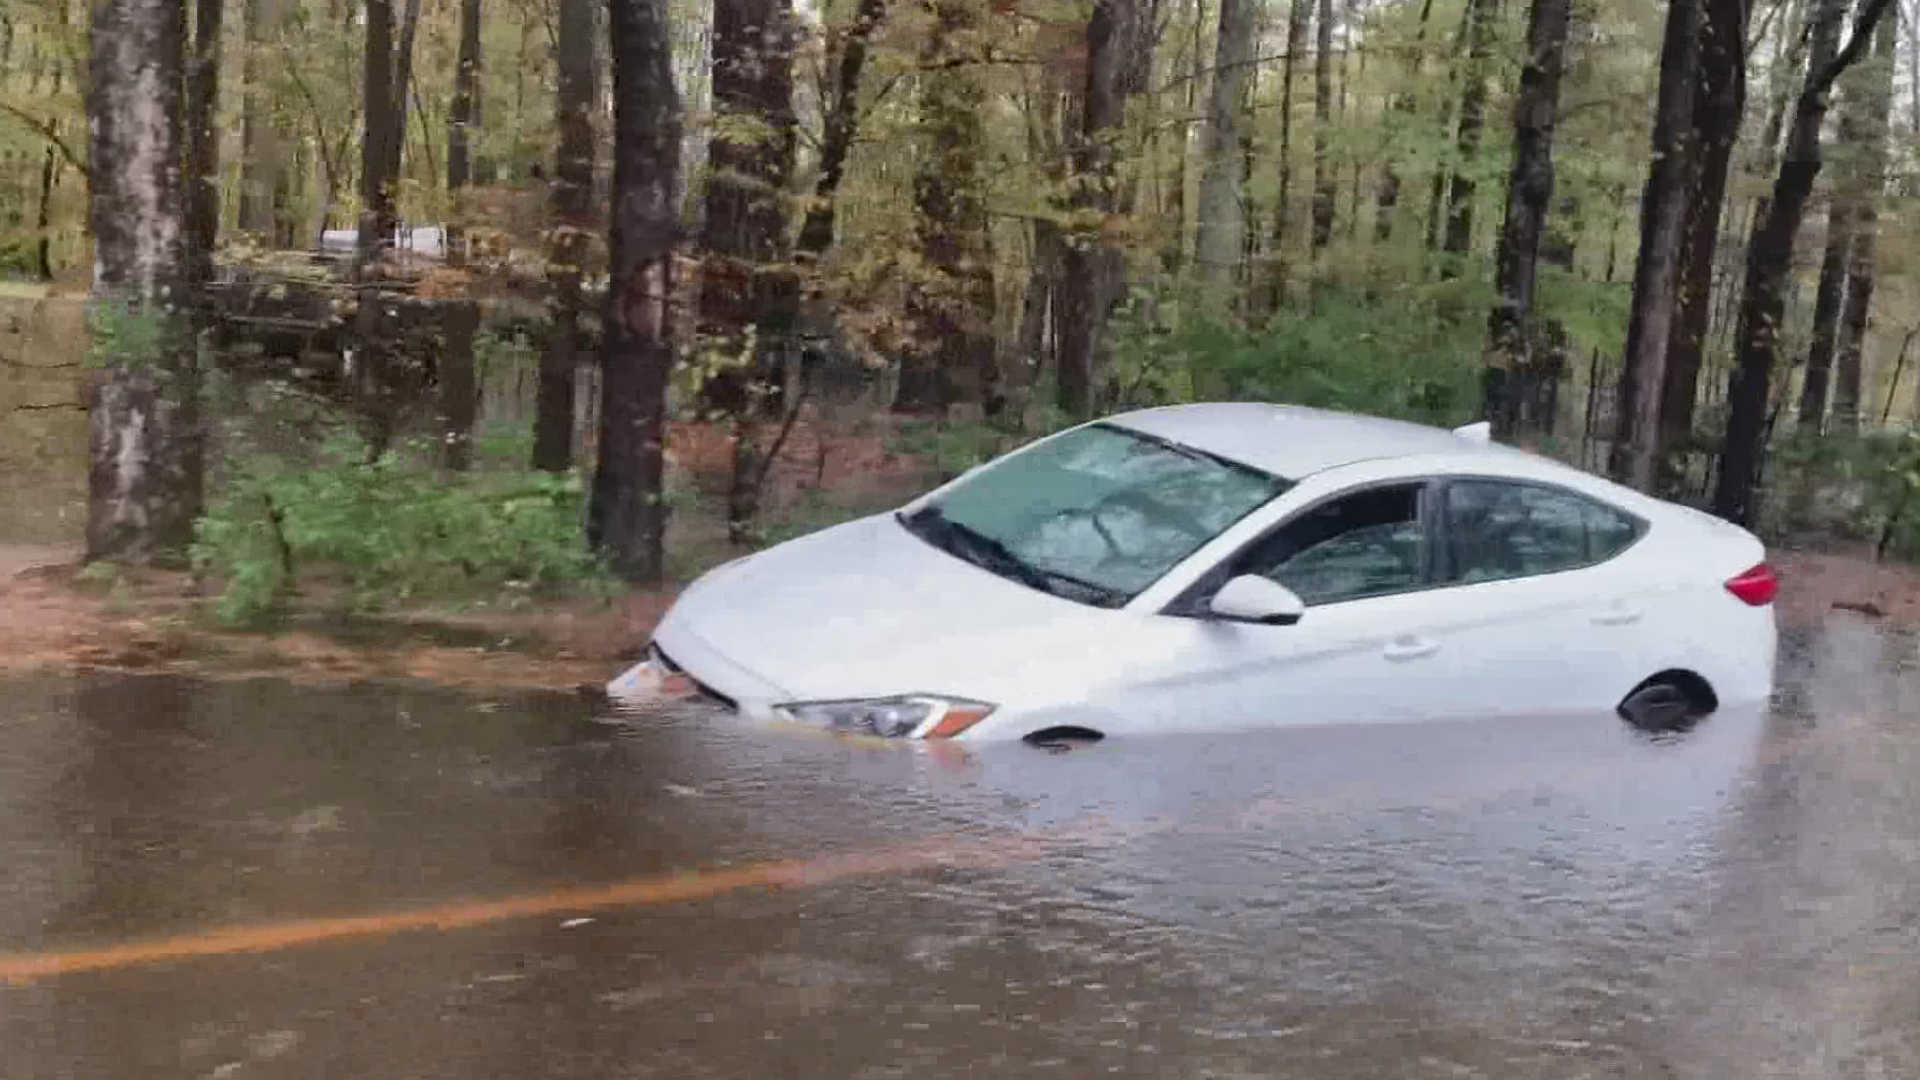 Floodwaters had been impacting Virginia Beach roads all day on November 12, and some roads still had detours by 5:30 p.m.